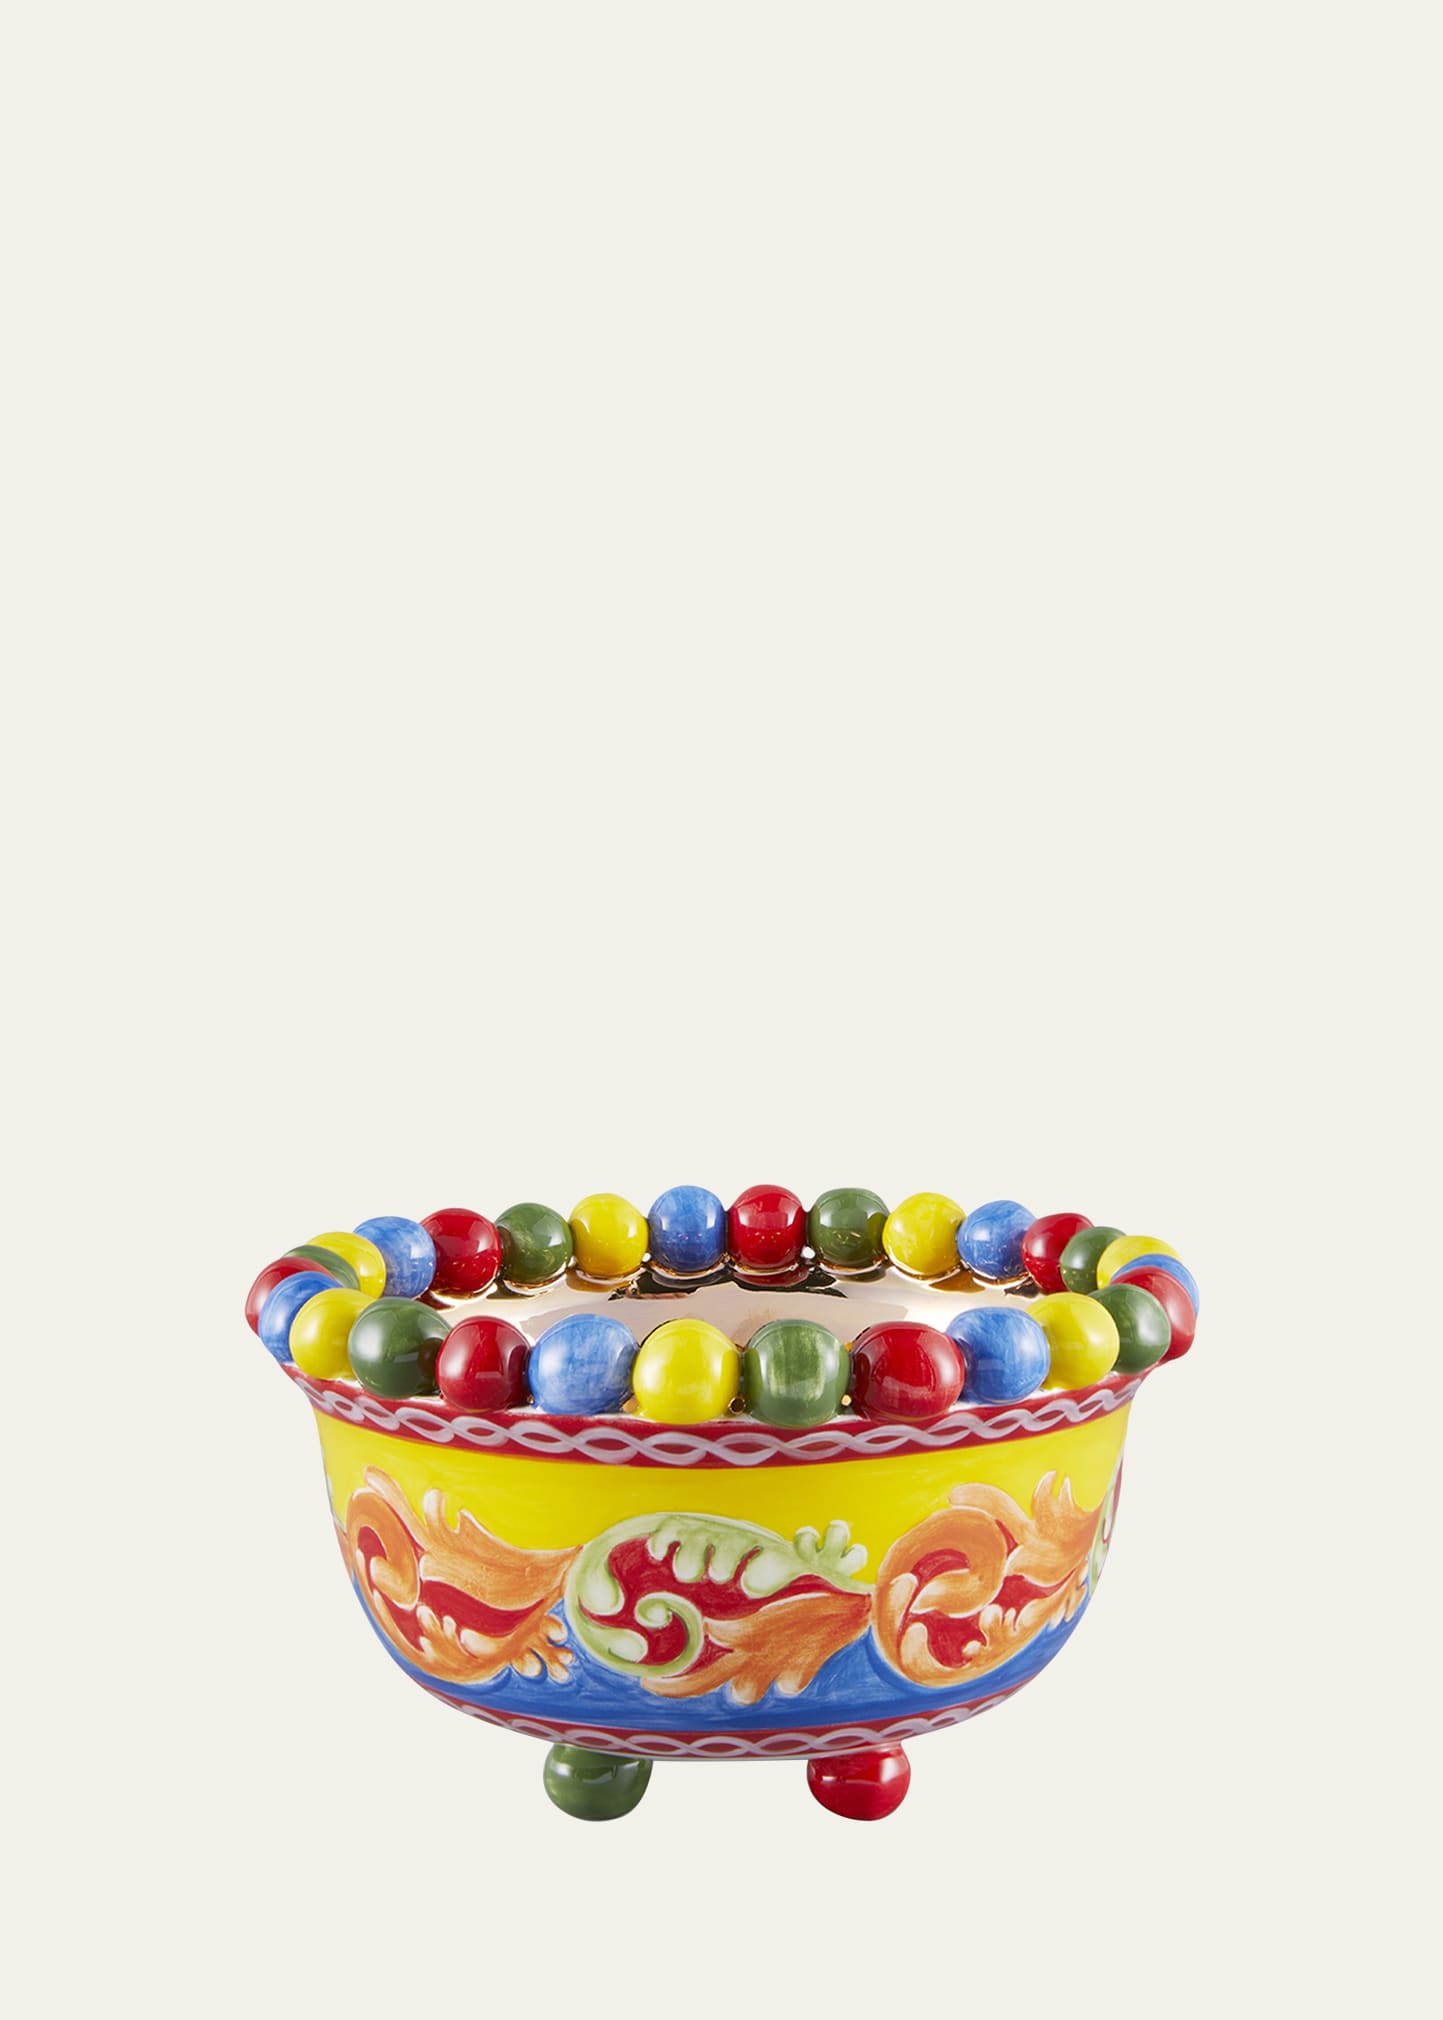 Carretto Large Bowl With Colored Small Balls, 6.5"